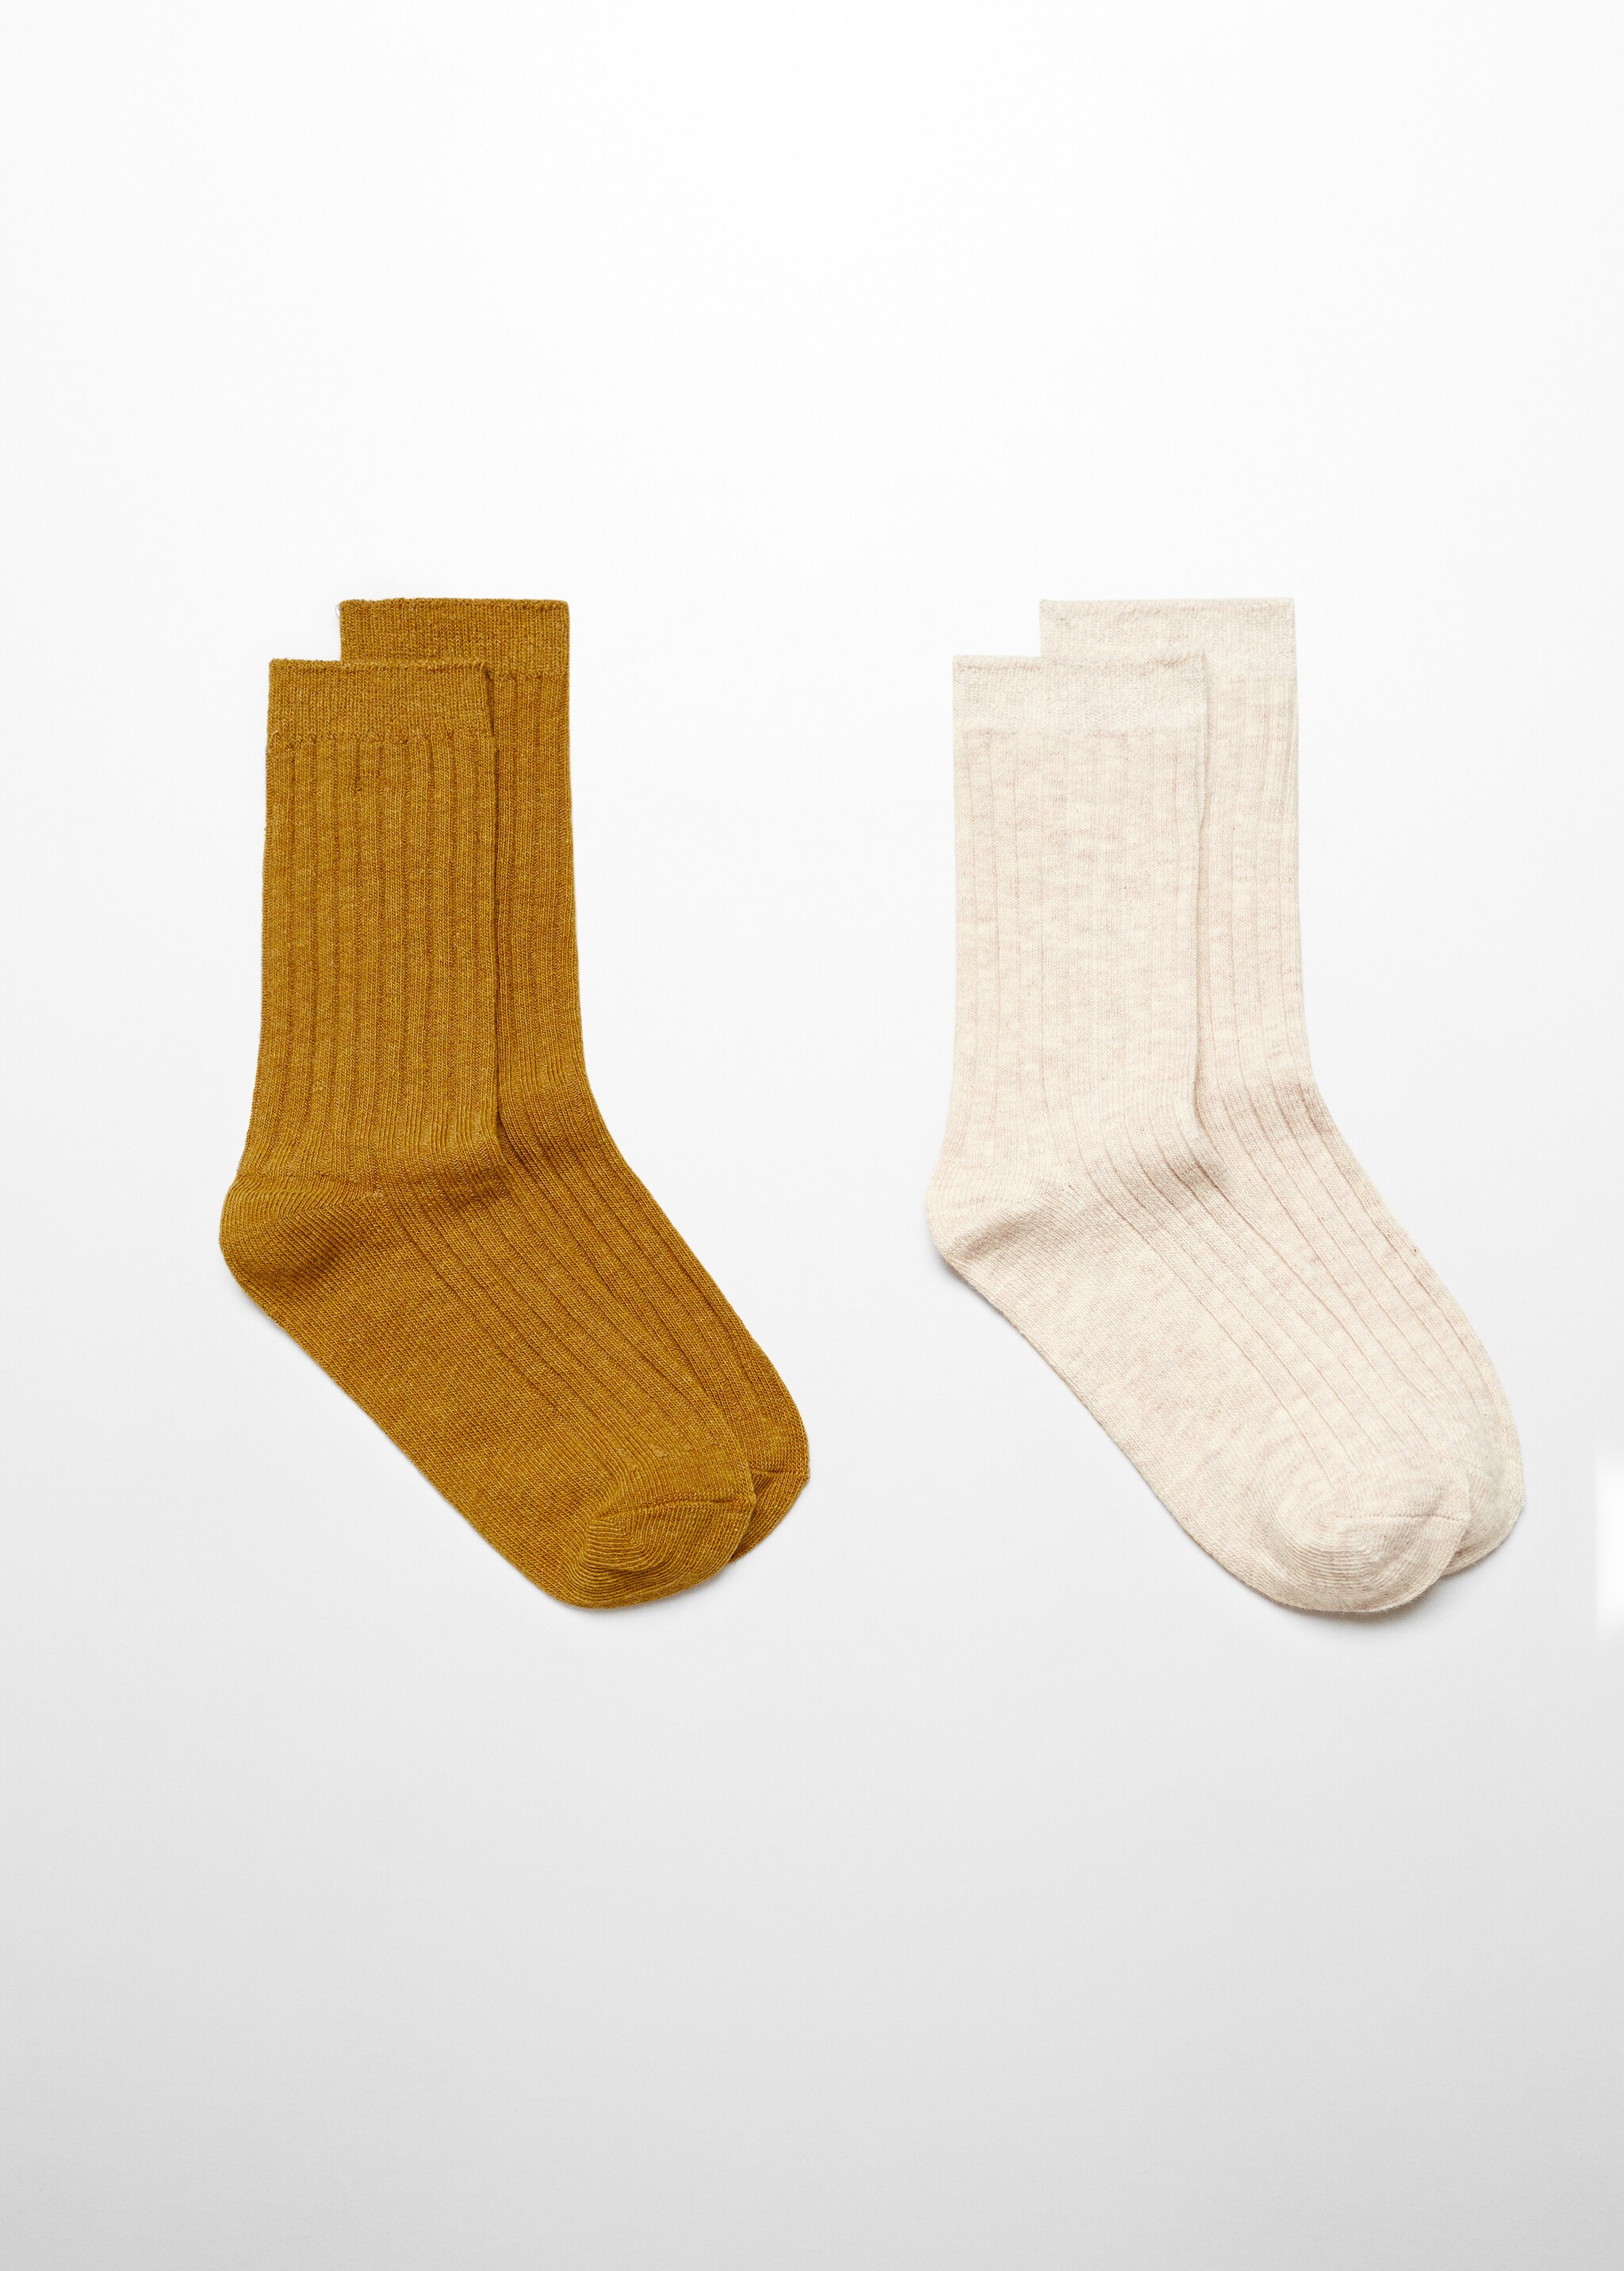 2 knit socks pack - Article without model